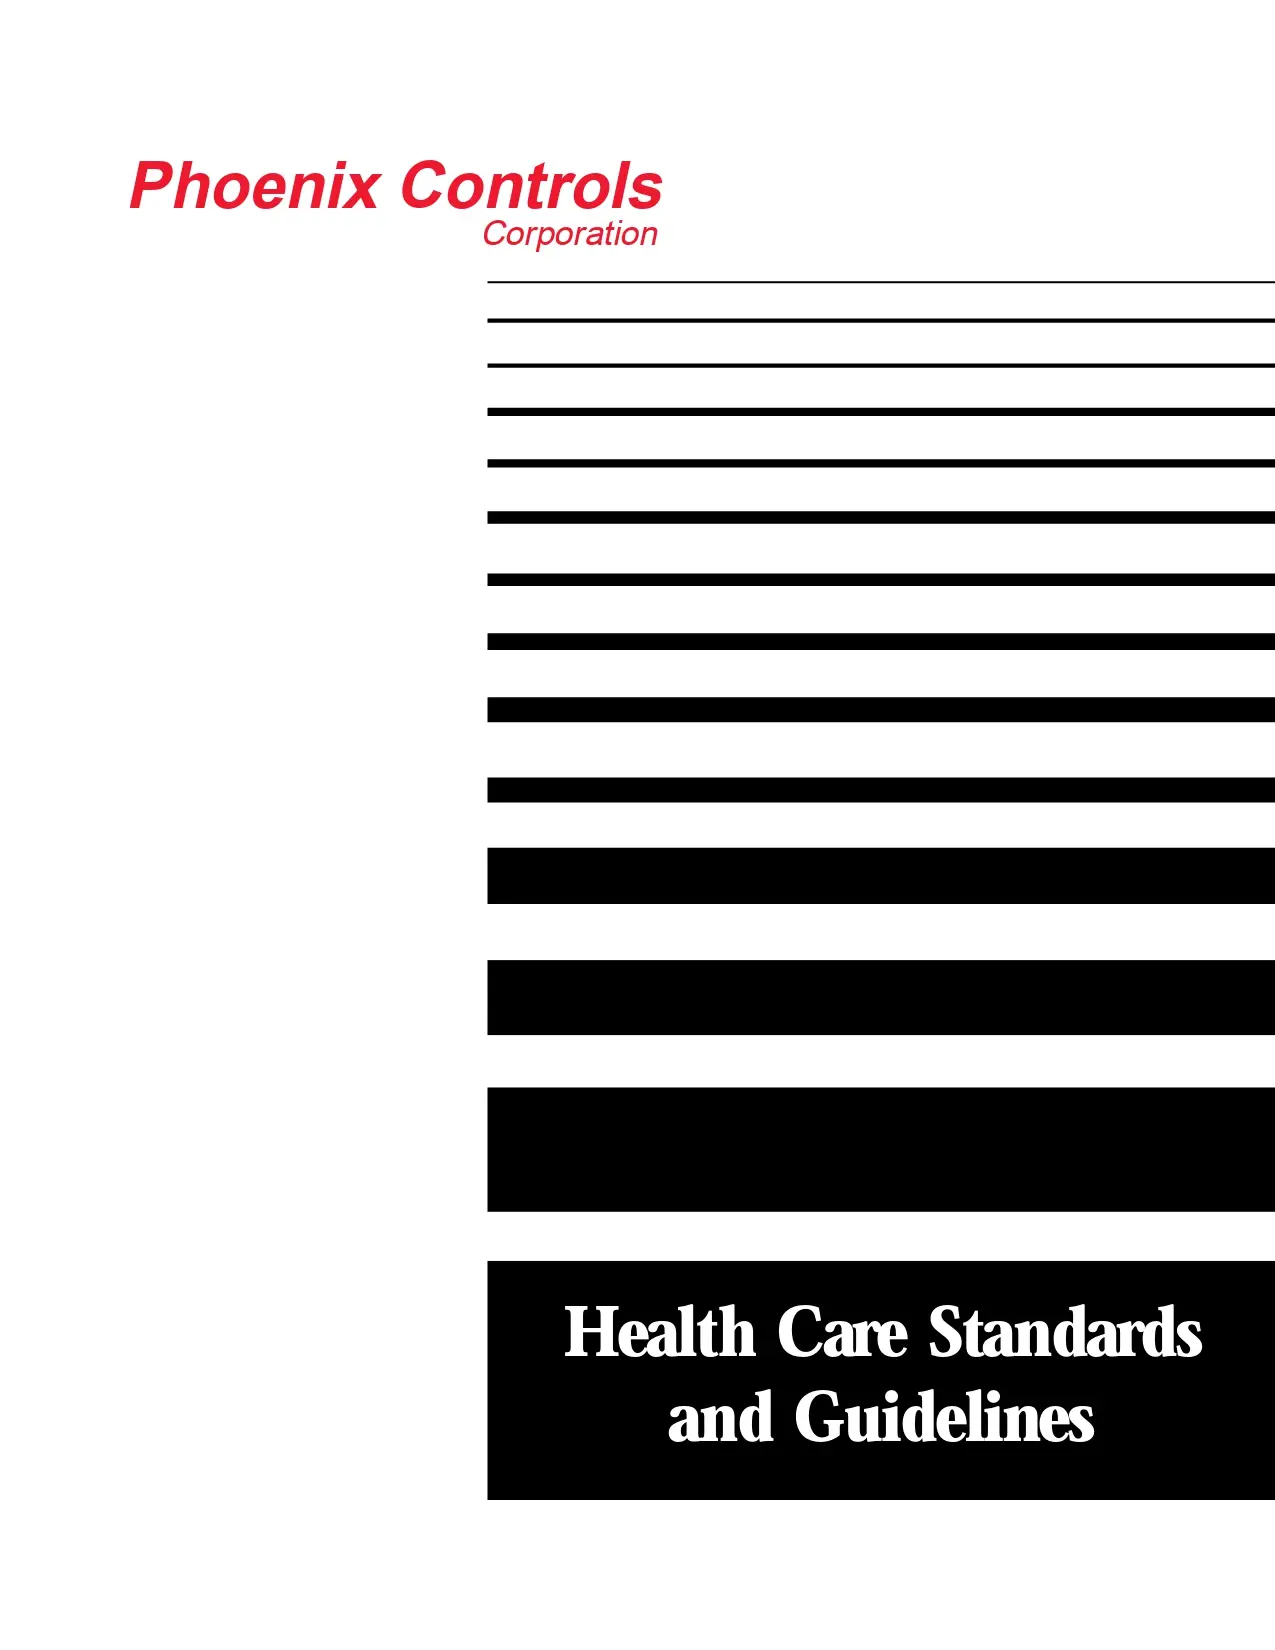 Health Care Standards And Guidelines